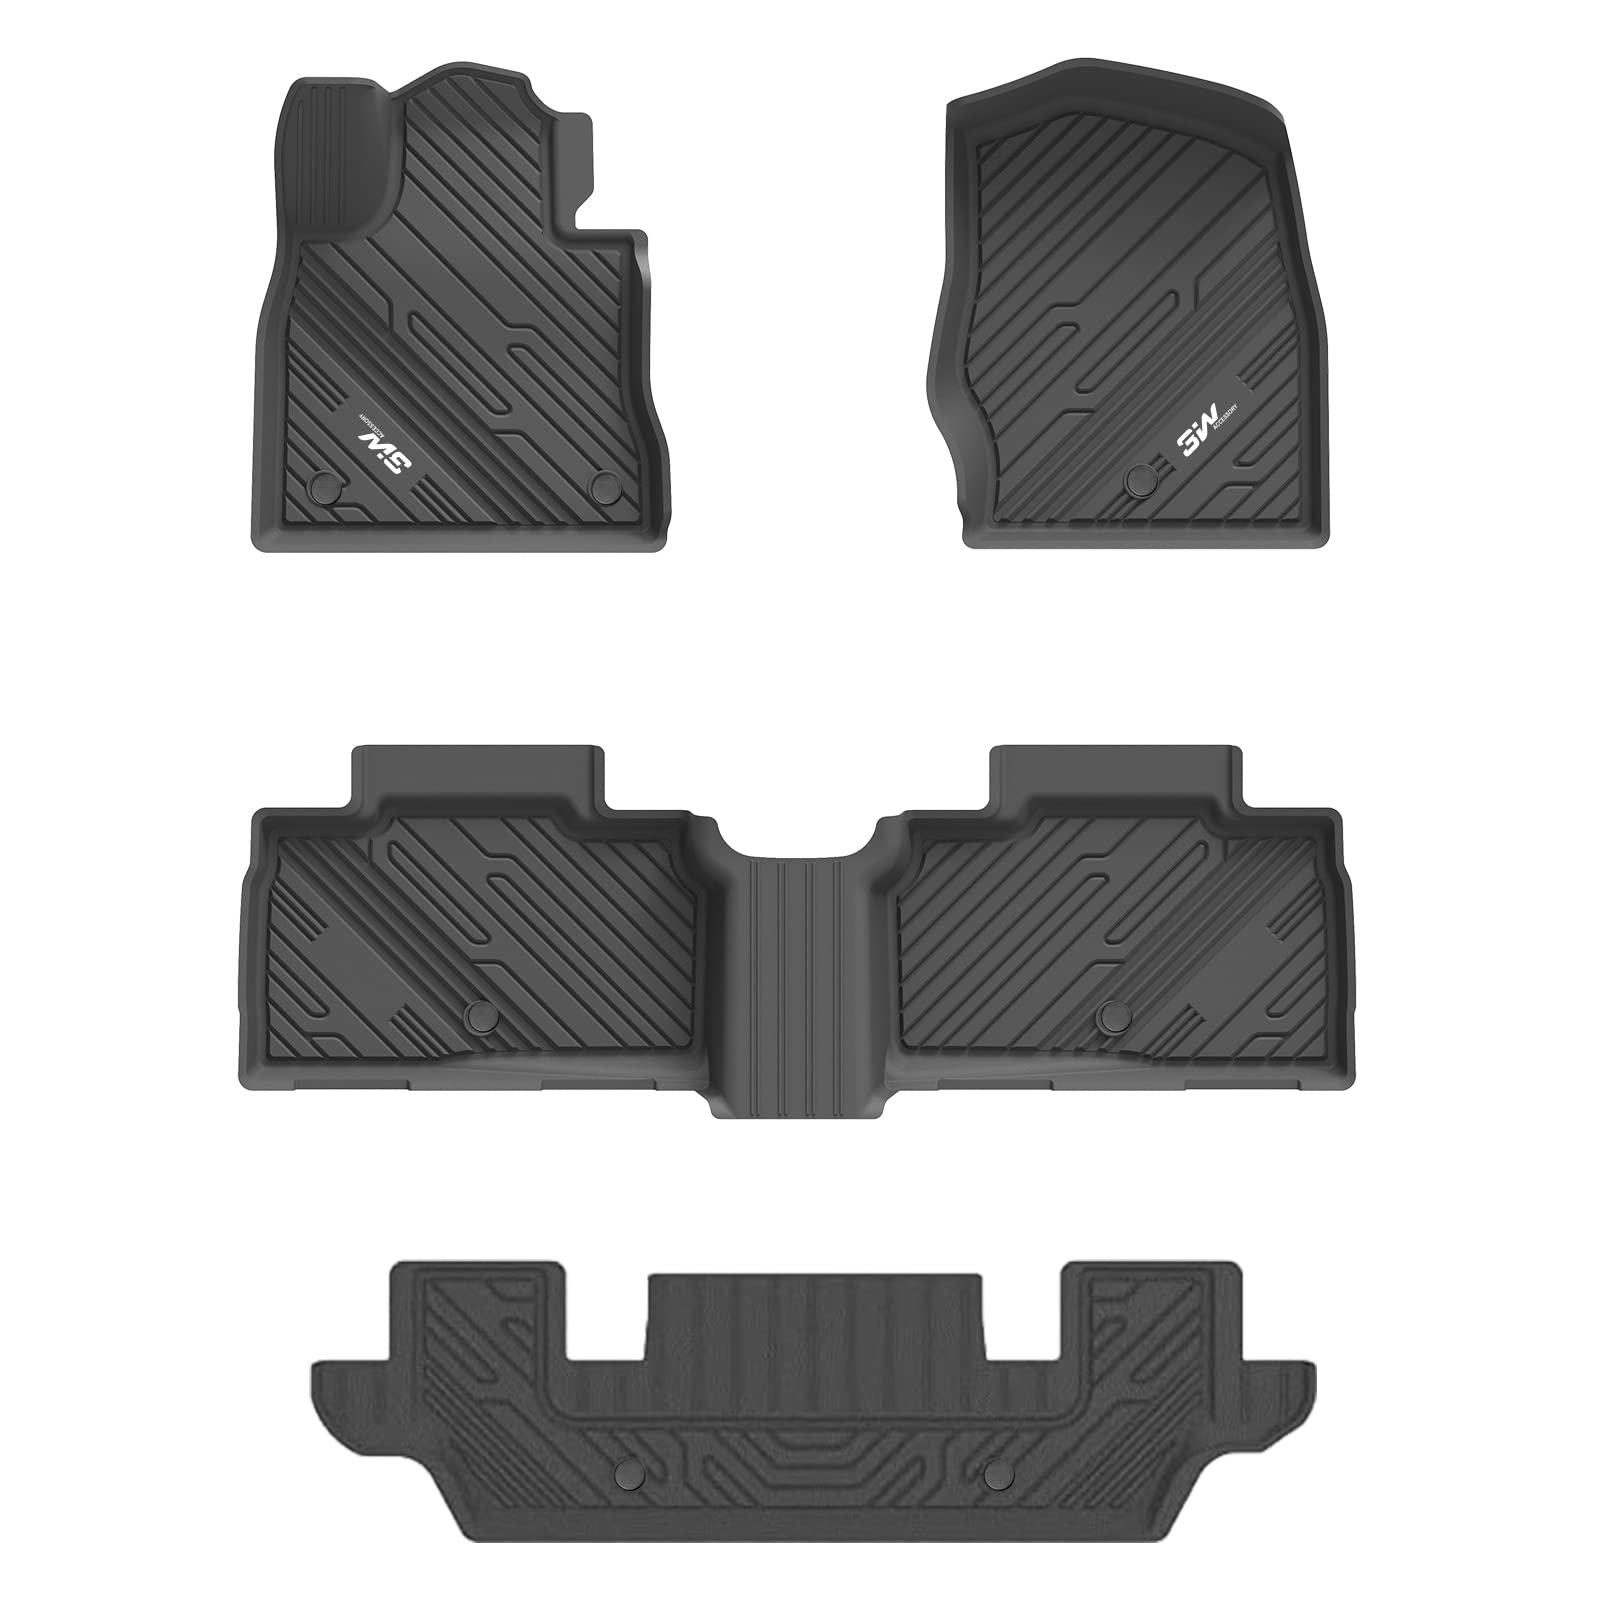 3W Ford Explorer 2020-2024 Floor Mats 6-Seat (Includes Hybrid) TPE Material & All-Weather Protection Vehicles & Parts 3Wliners 2020-2024 6 Seat Explorer 2020-2024 1st&2nd&3rd Row Mats